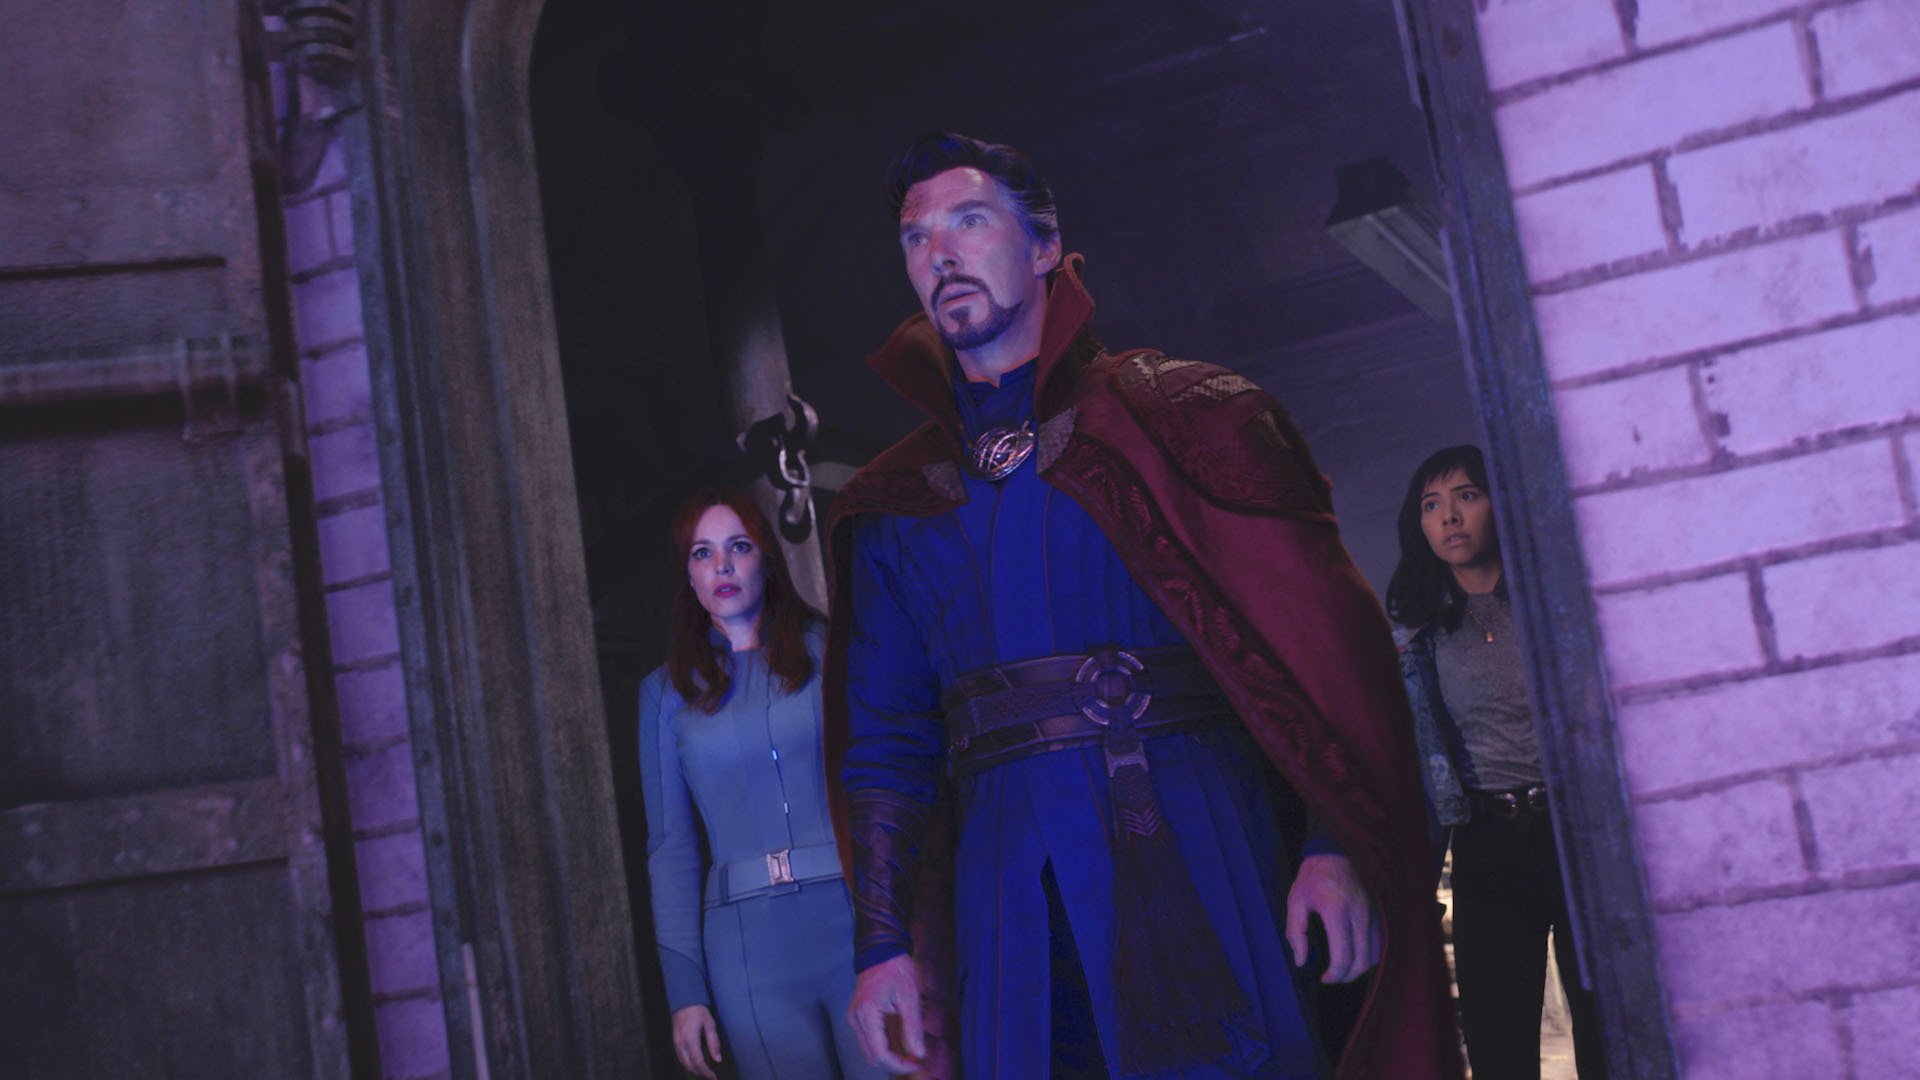 A man in a blue suit and red cape flanked by two women behind him in a doorway, all of them looking ahead at something unseen casting a purple light; still from 